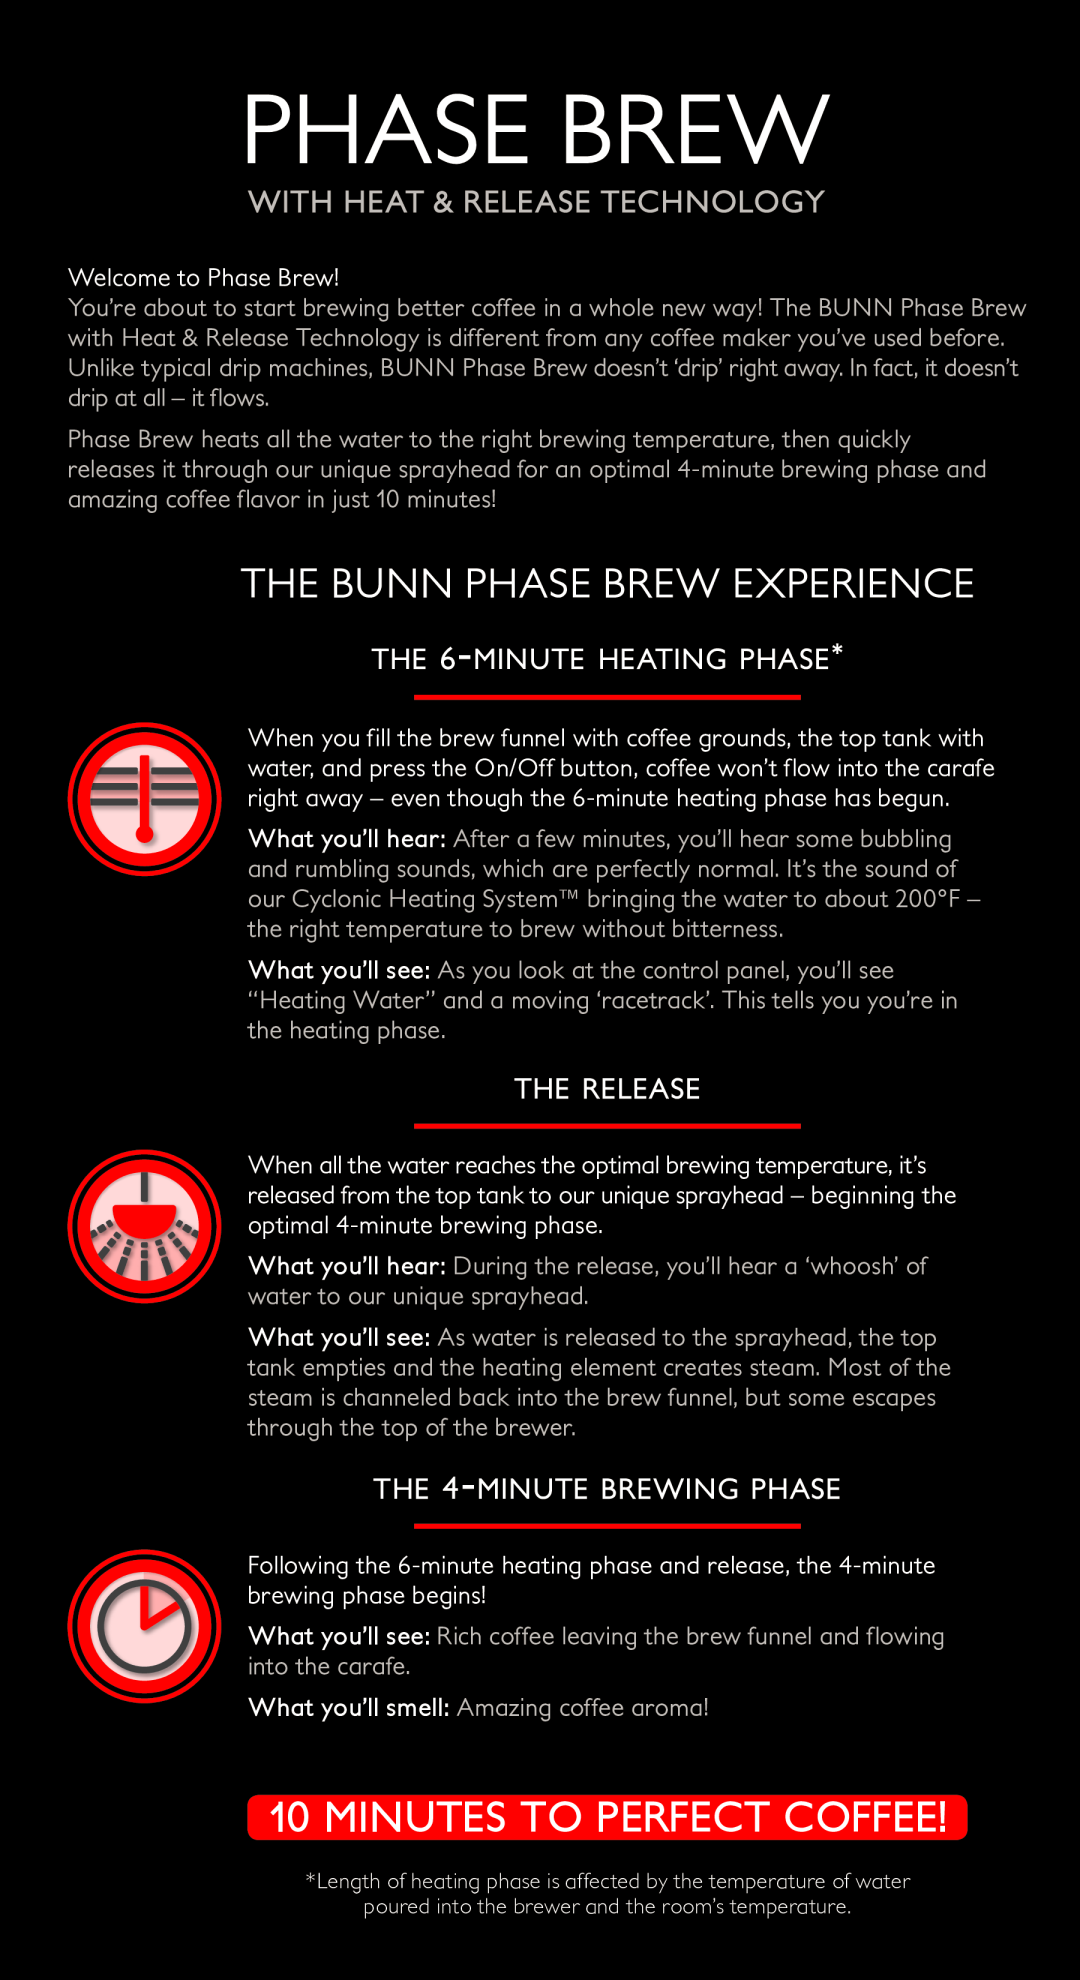 Bunn HG manual the 6-minute heating phase, the release, the 4-minute brewing phase, The Bunn Phase Brew Experience 